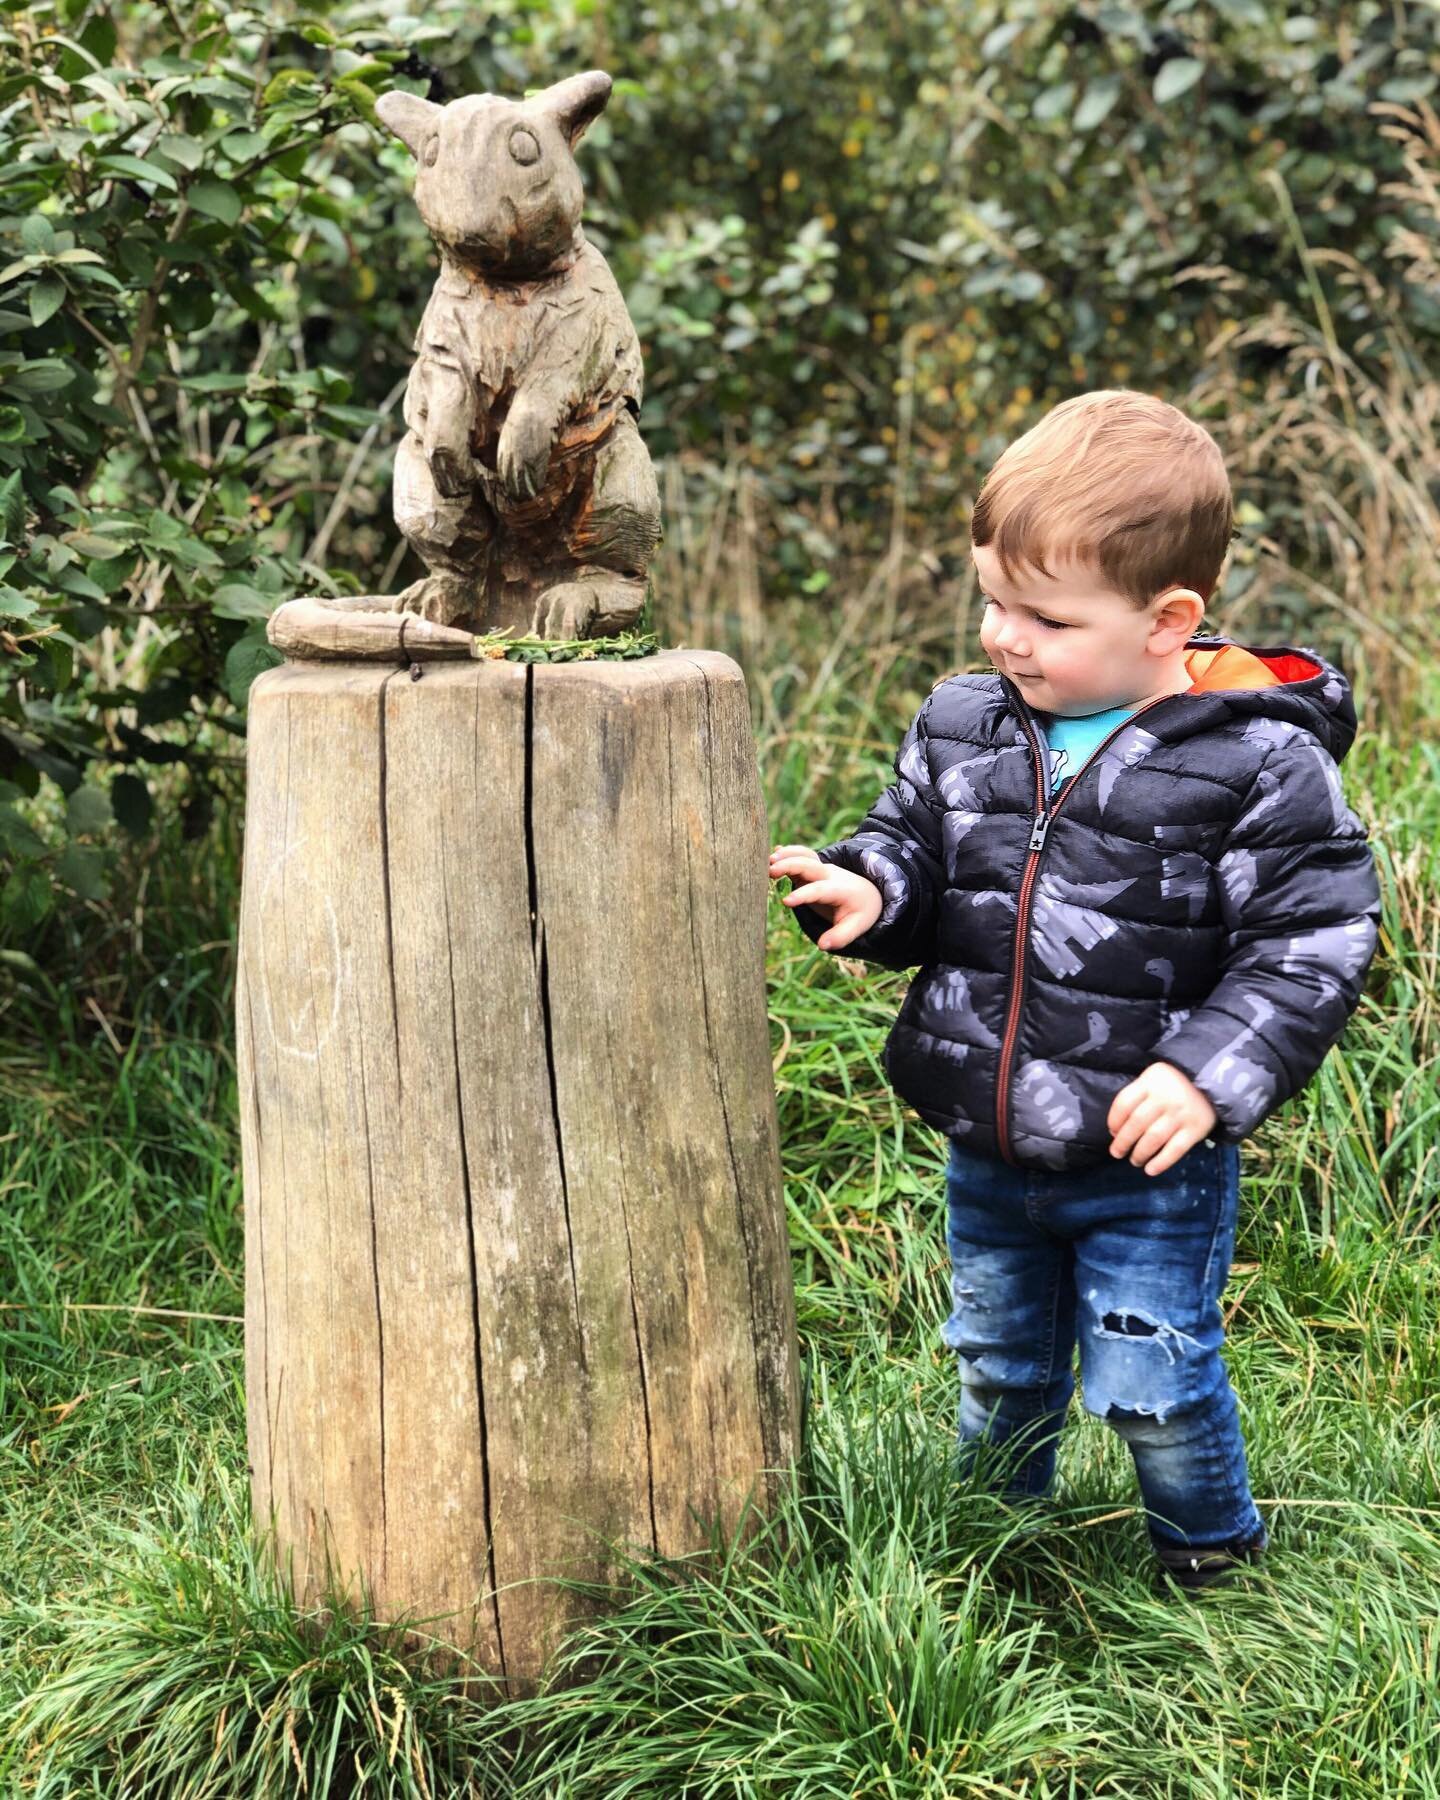 Today&rsquo;s woodland toddle featured owl spotting, badger riding and rabbit jumping! To check out our route and for details of next week&rsquo;s adventure, head to the Trail Tots Facebook group (link in bio). 🍂 #trailtots

________________________